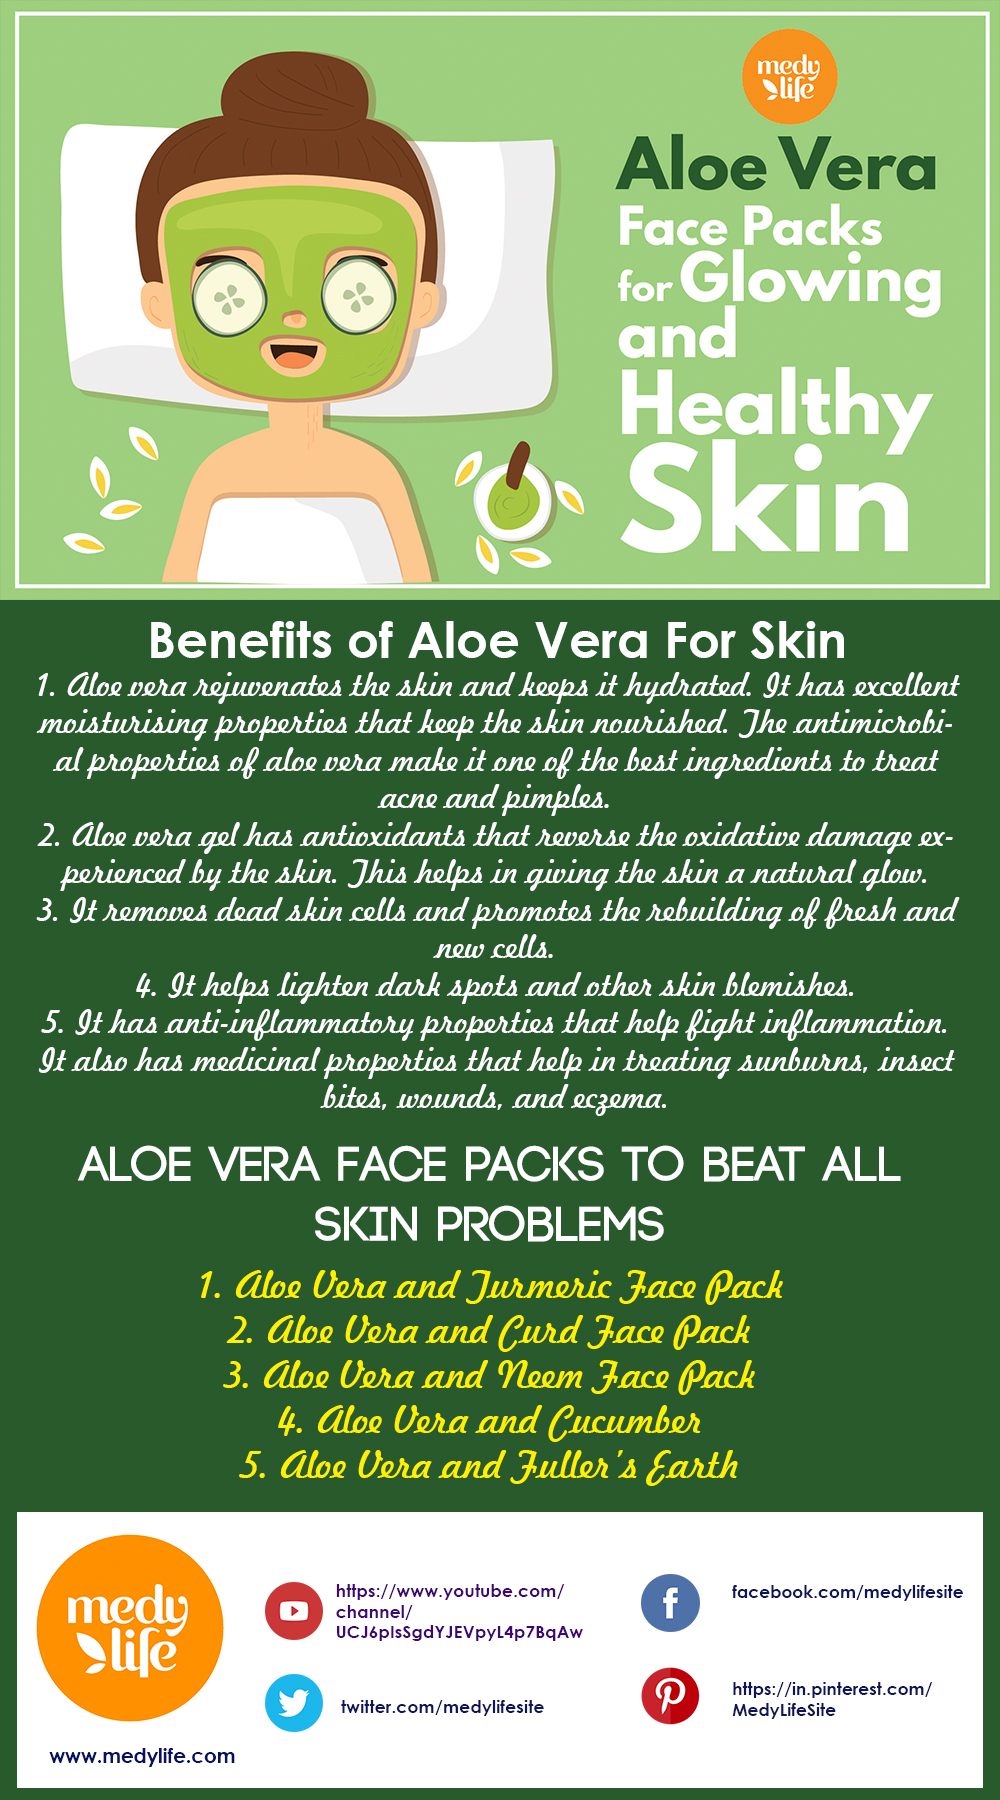 Aloe Vera Face Packs for Glowing and Healthy SkinINFO